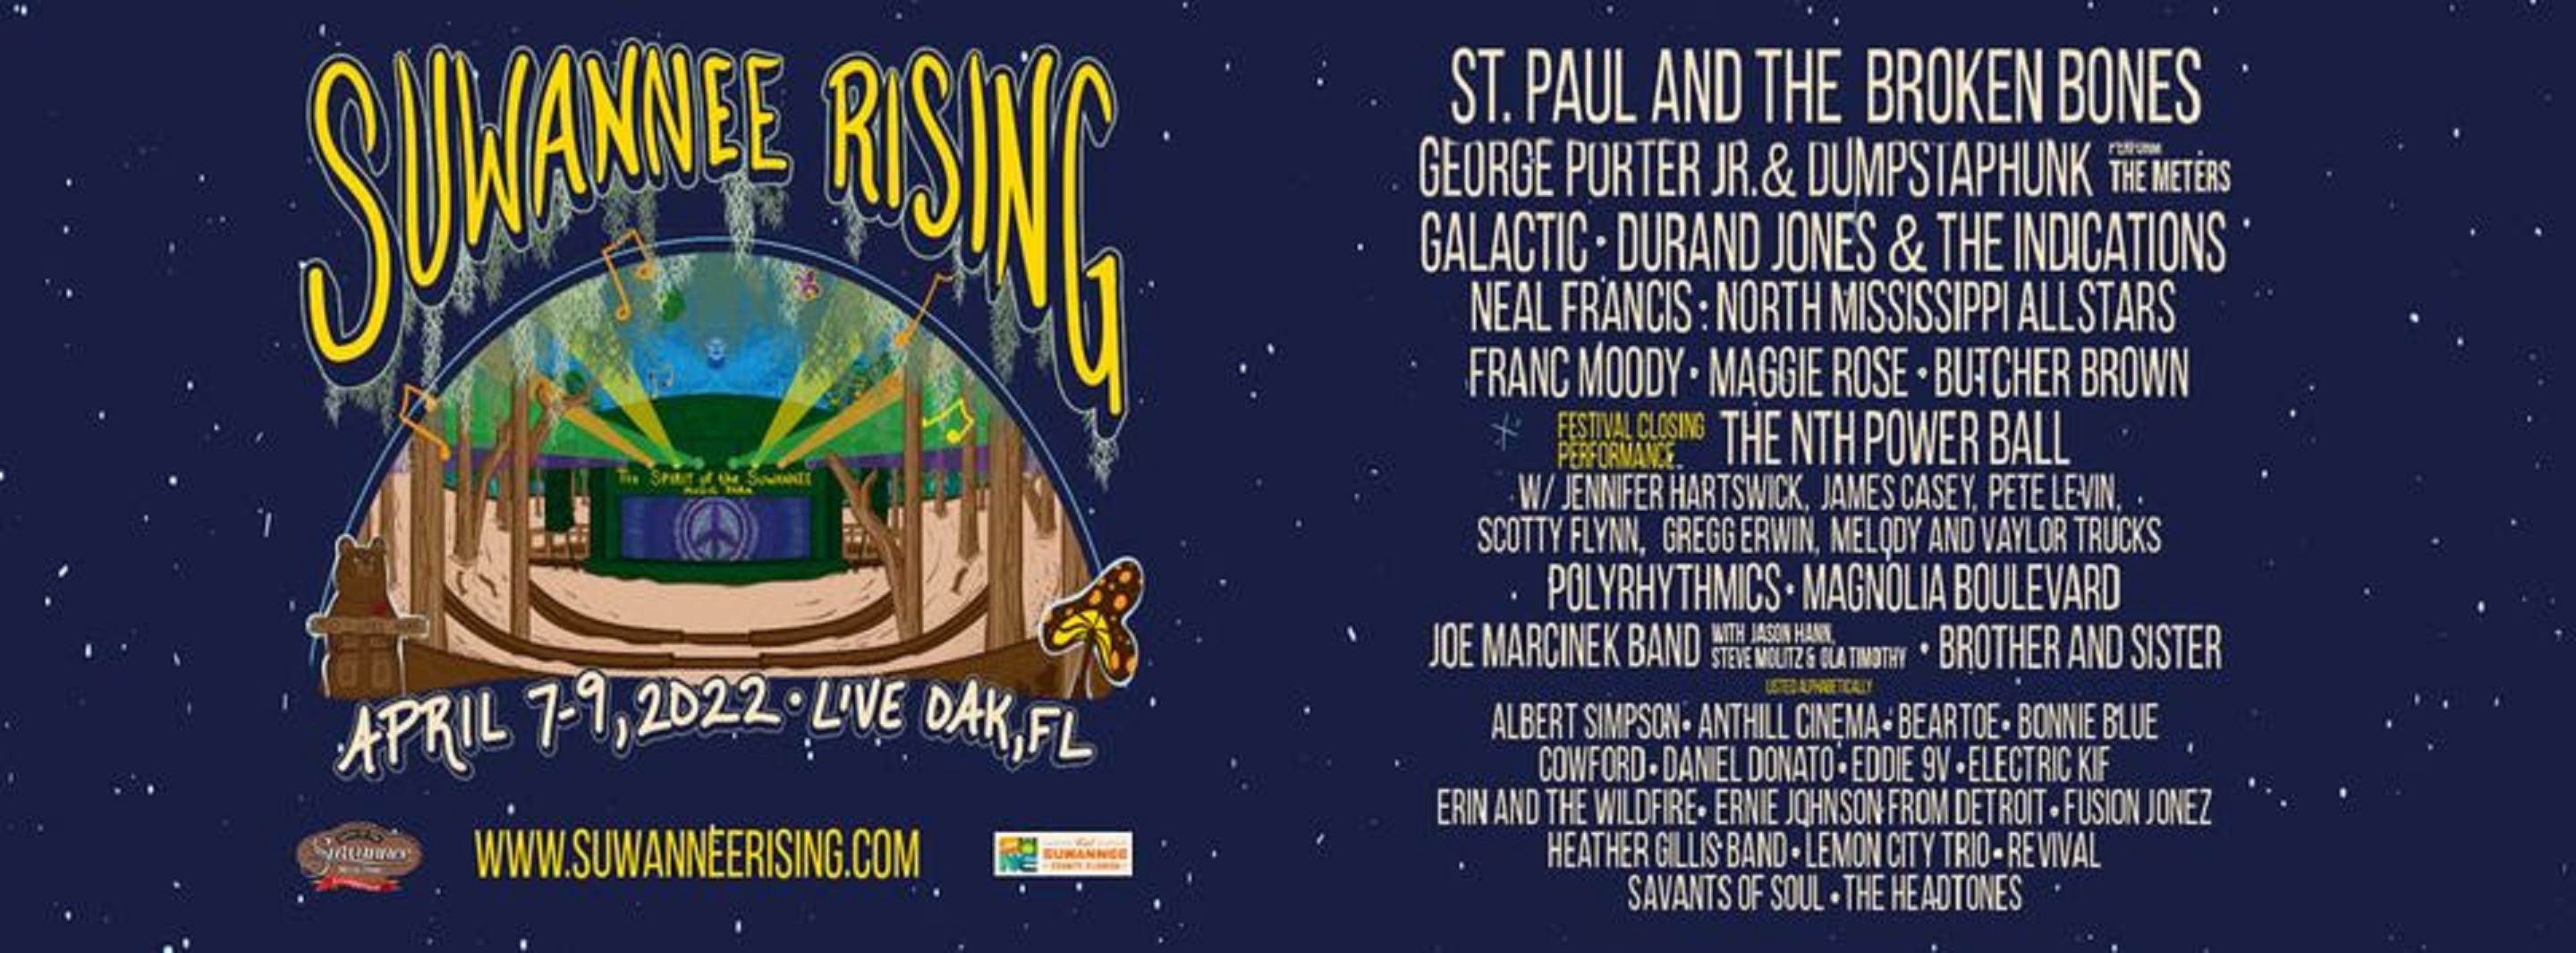 Brother & Sister Perform At 3rd Annual Suwannee Rising Festival This Saturday